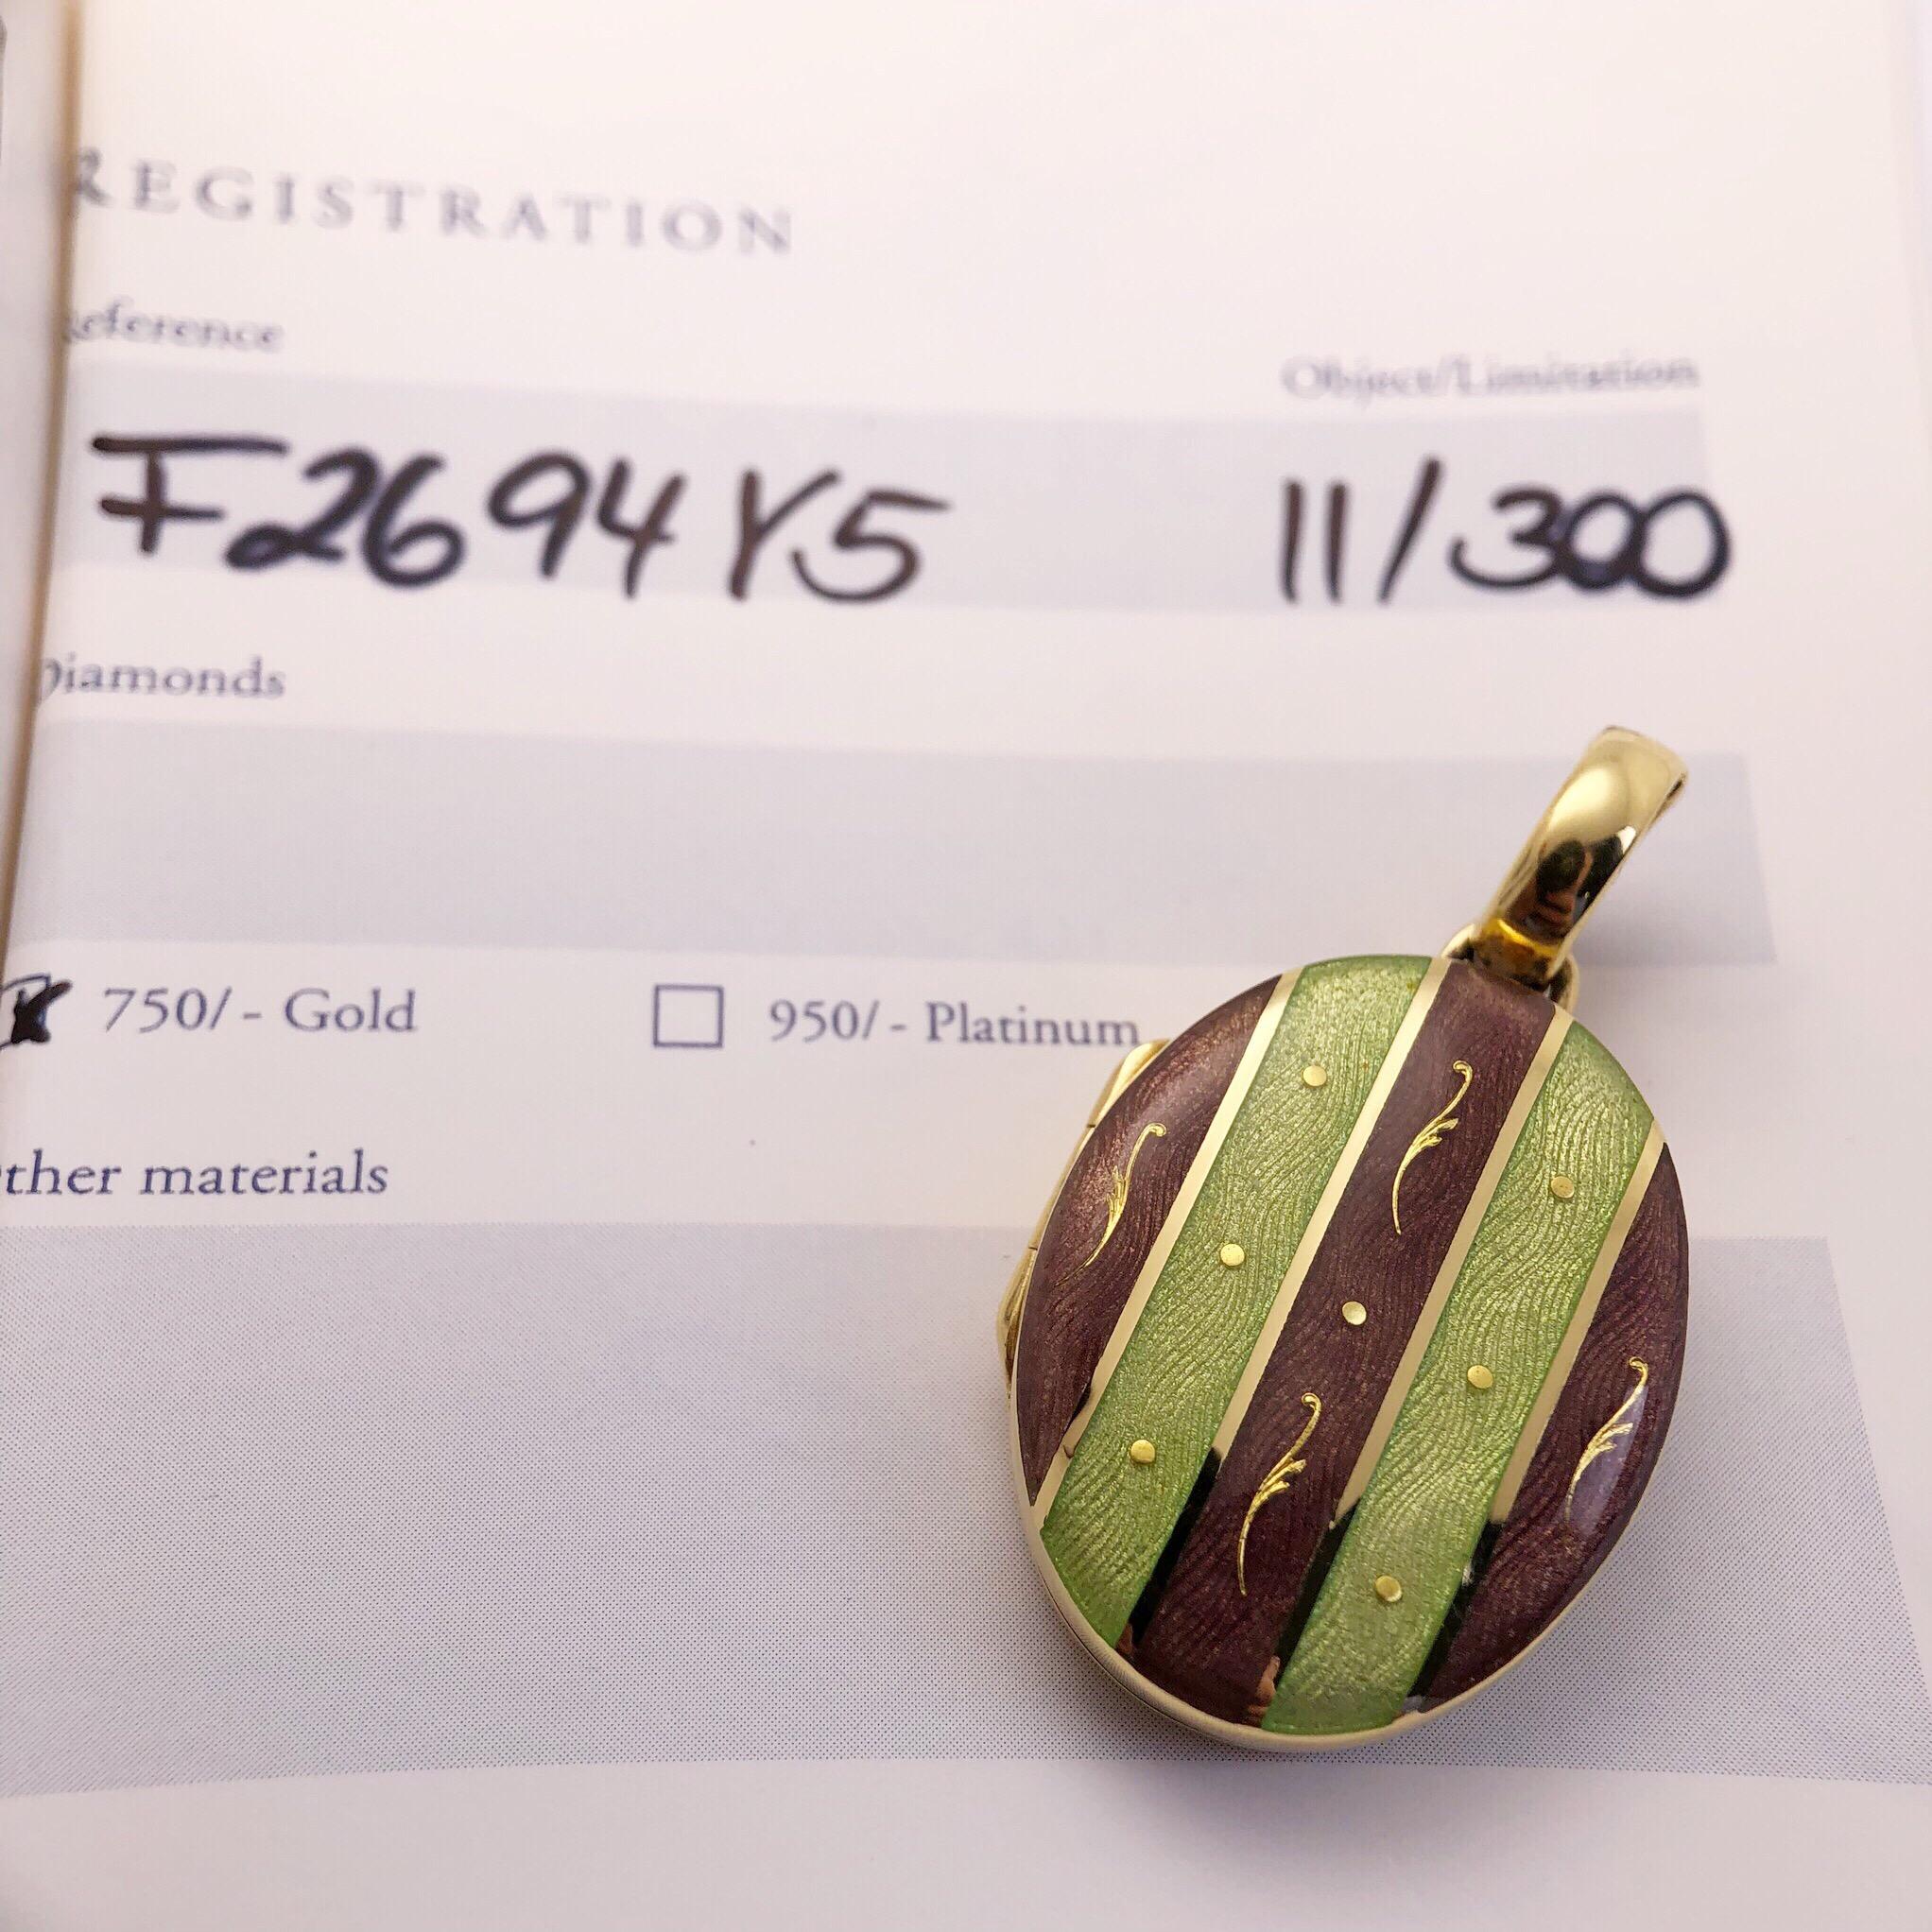 This Modern Faberge 18 Karat Yellow Gold oval locket is adorned with Purple and Green Guilloché Enamel stripes. The 18 Karat yellow gold bale opens allowing you to attach the locket on to various strands. The locket opens and contains two removable